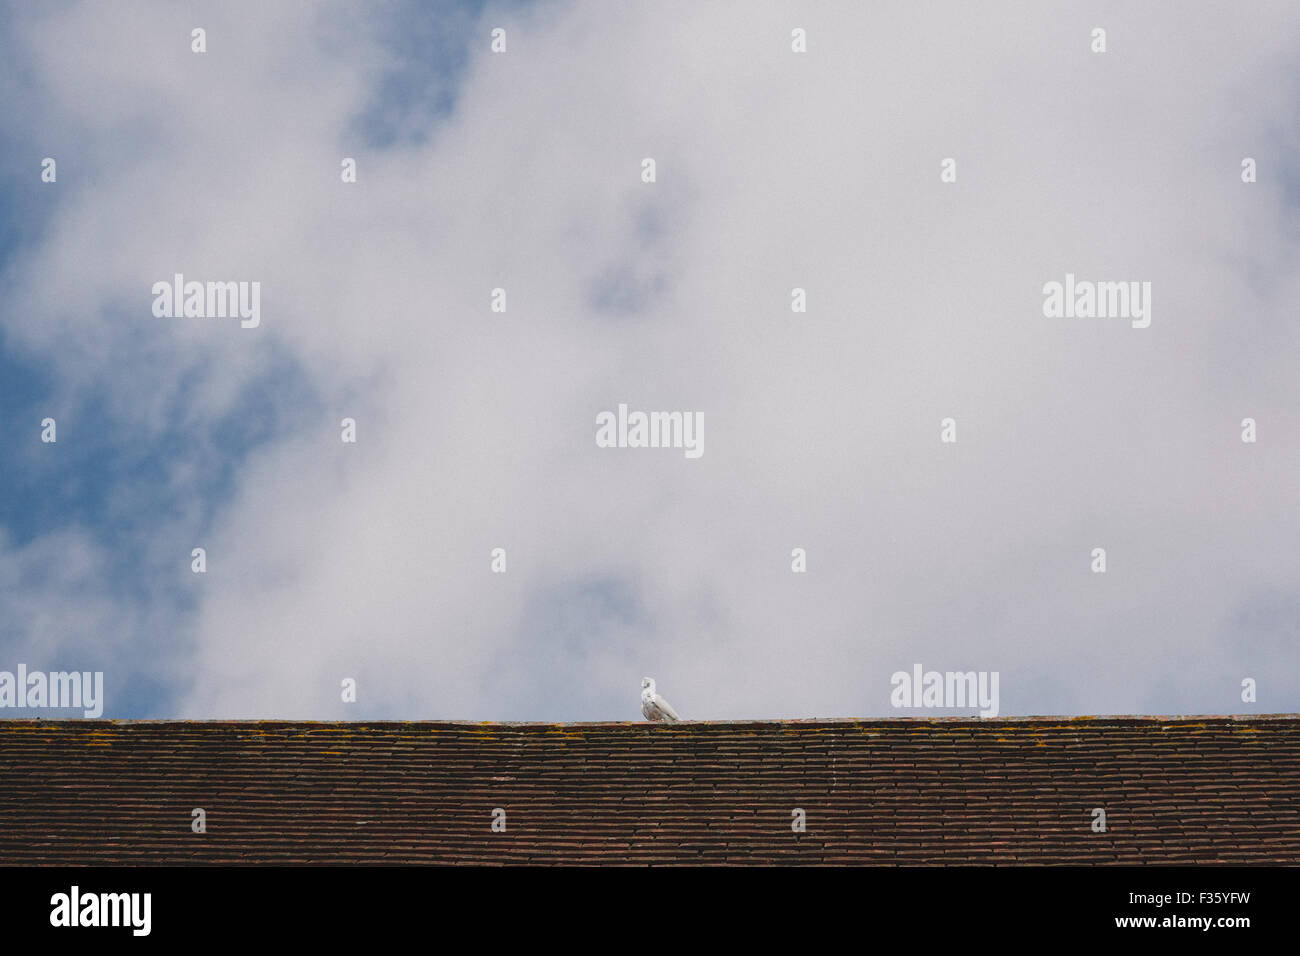 Pigeon Bird on top of a Barn with blue sky Stock Photo